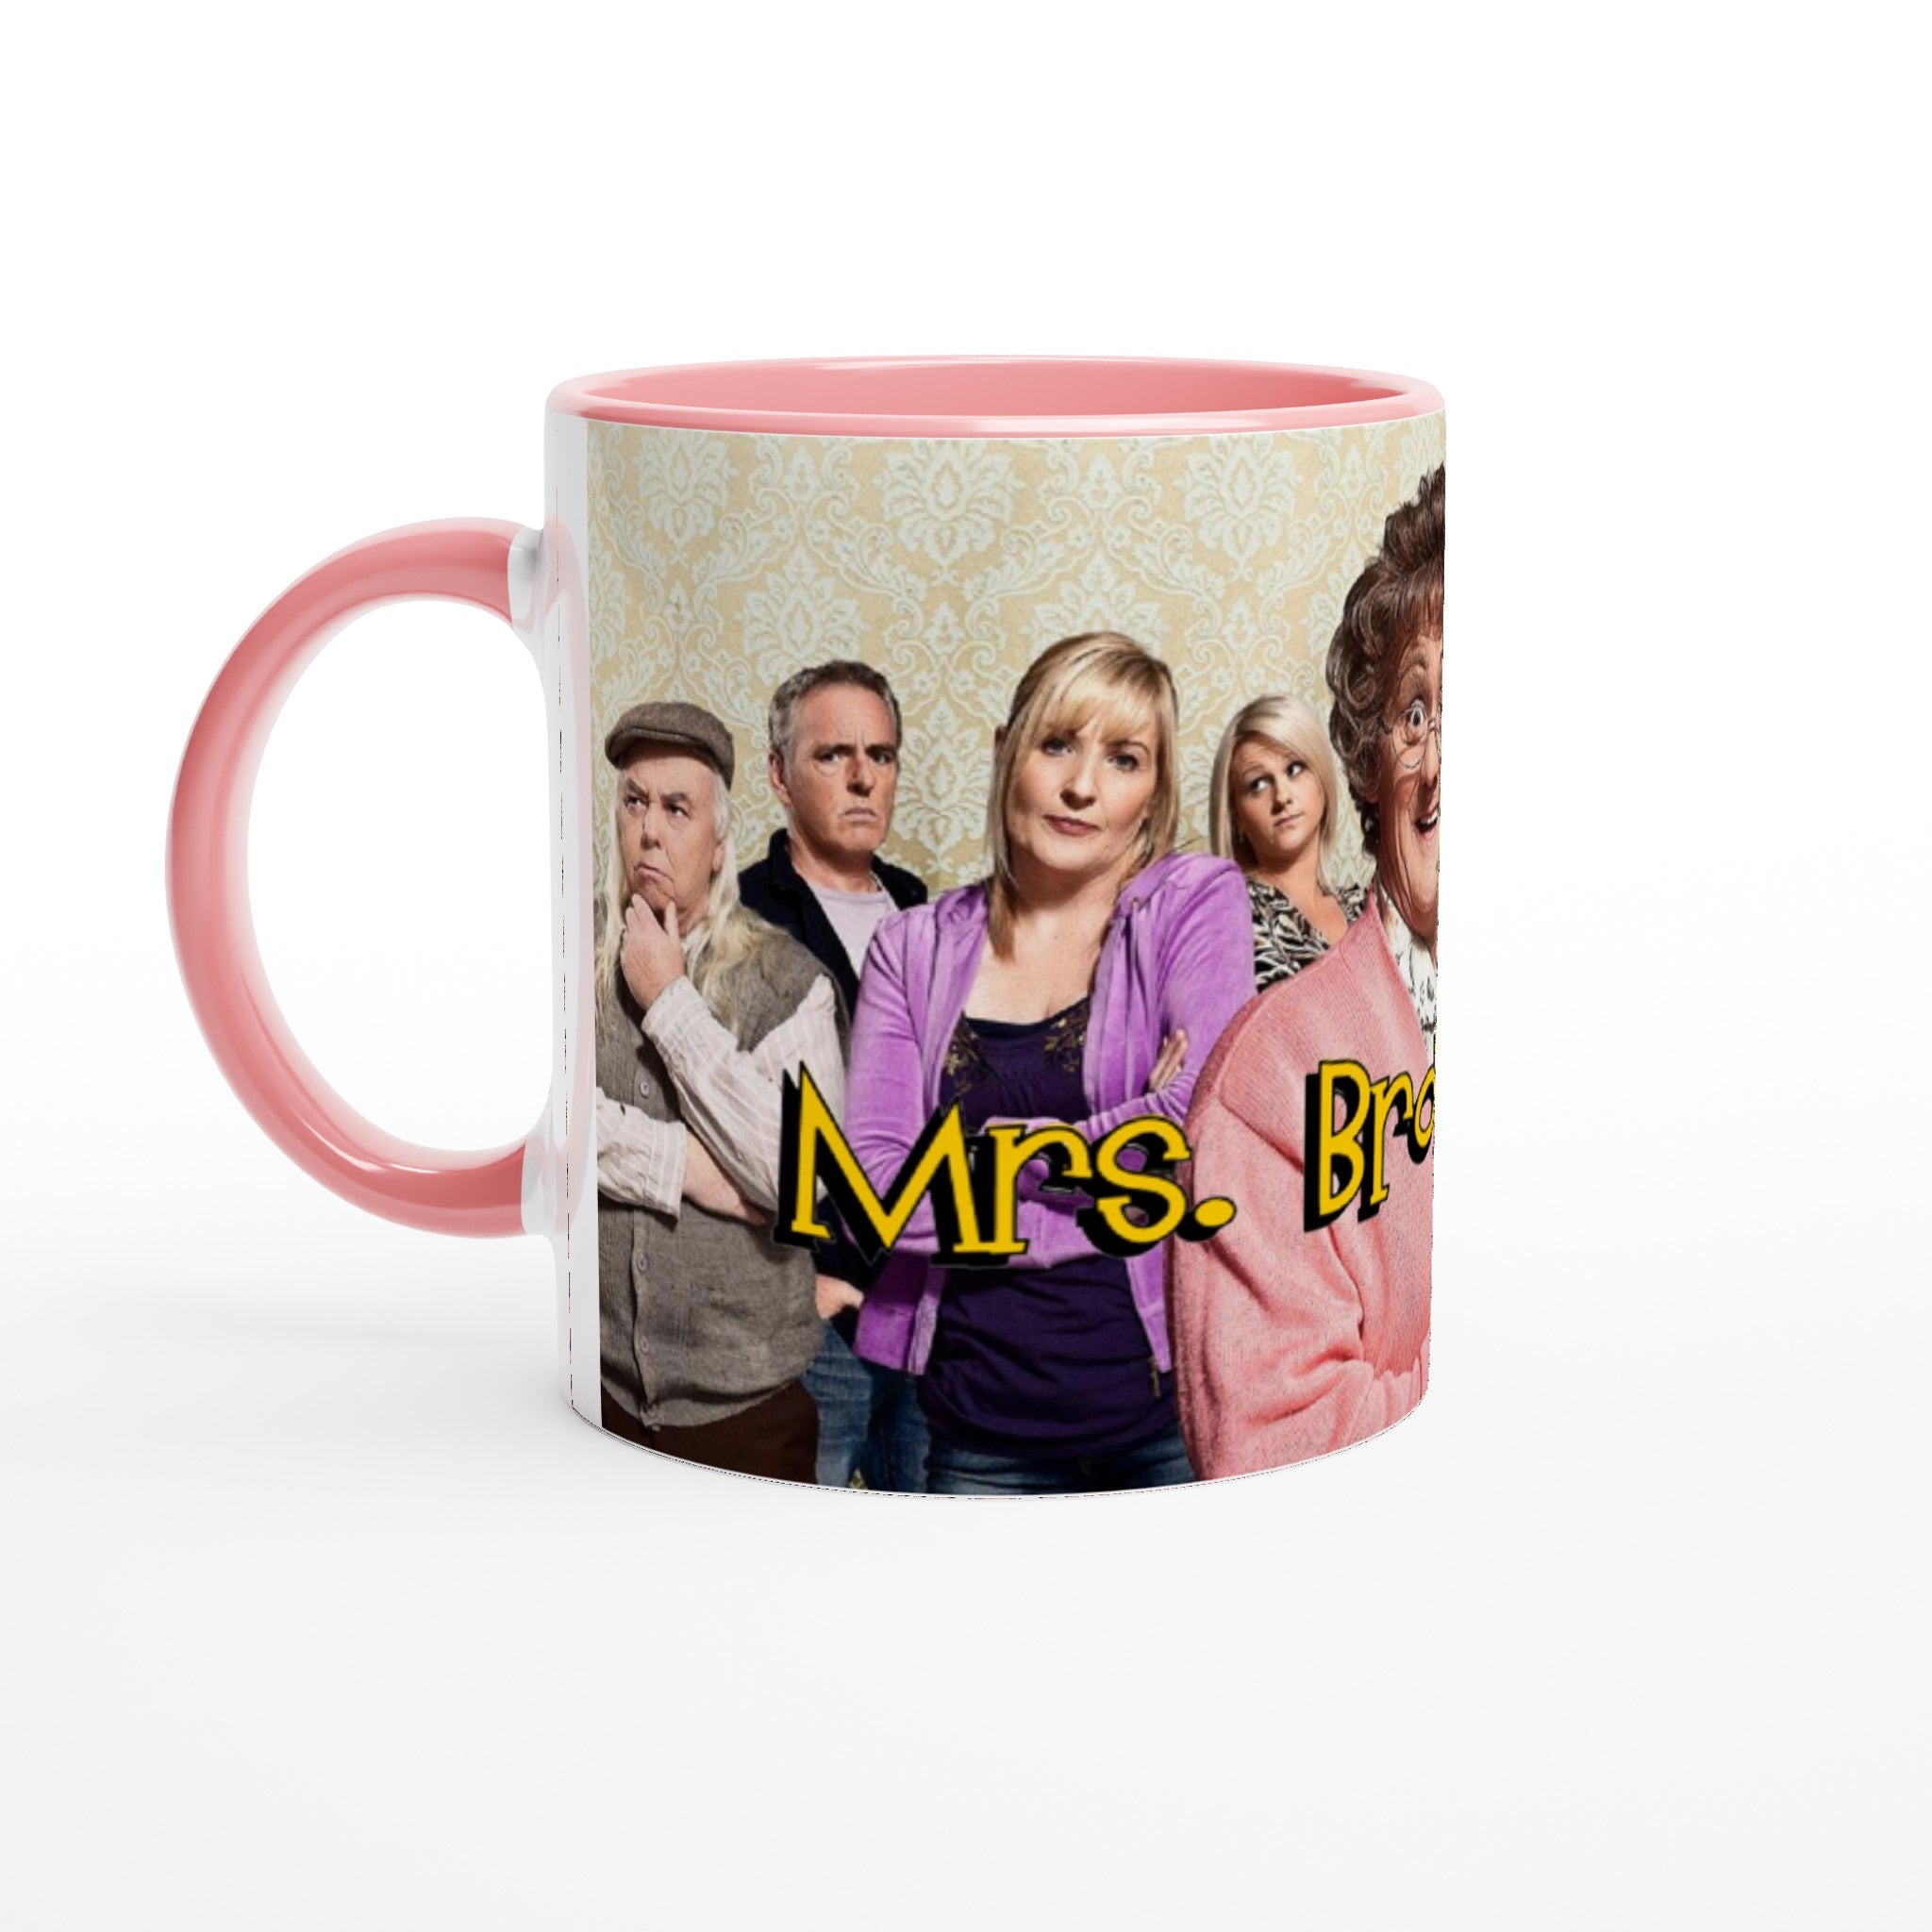 Mrs Browns Boys- White 11oz Ceramic Mug with Color Inside - Creations by Chris and Carlos